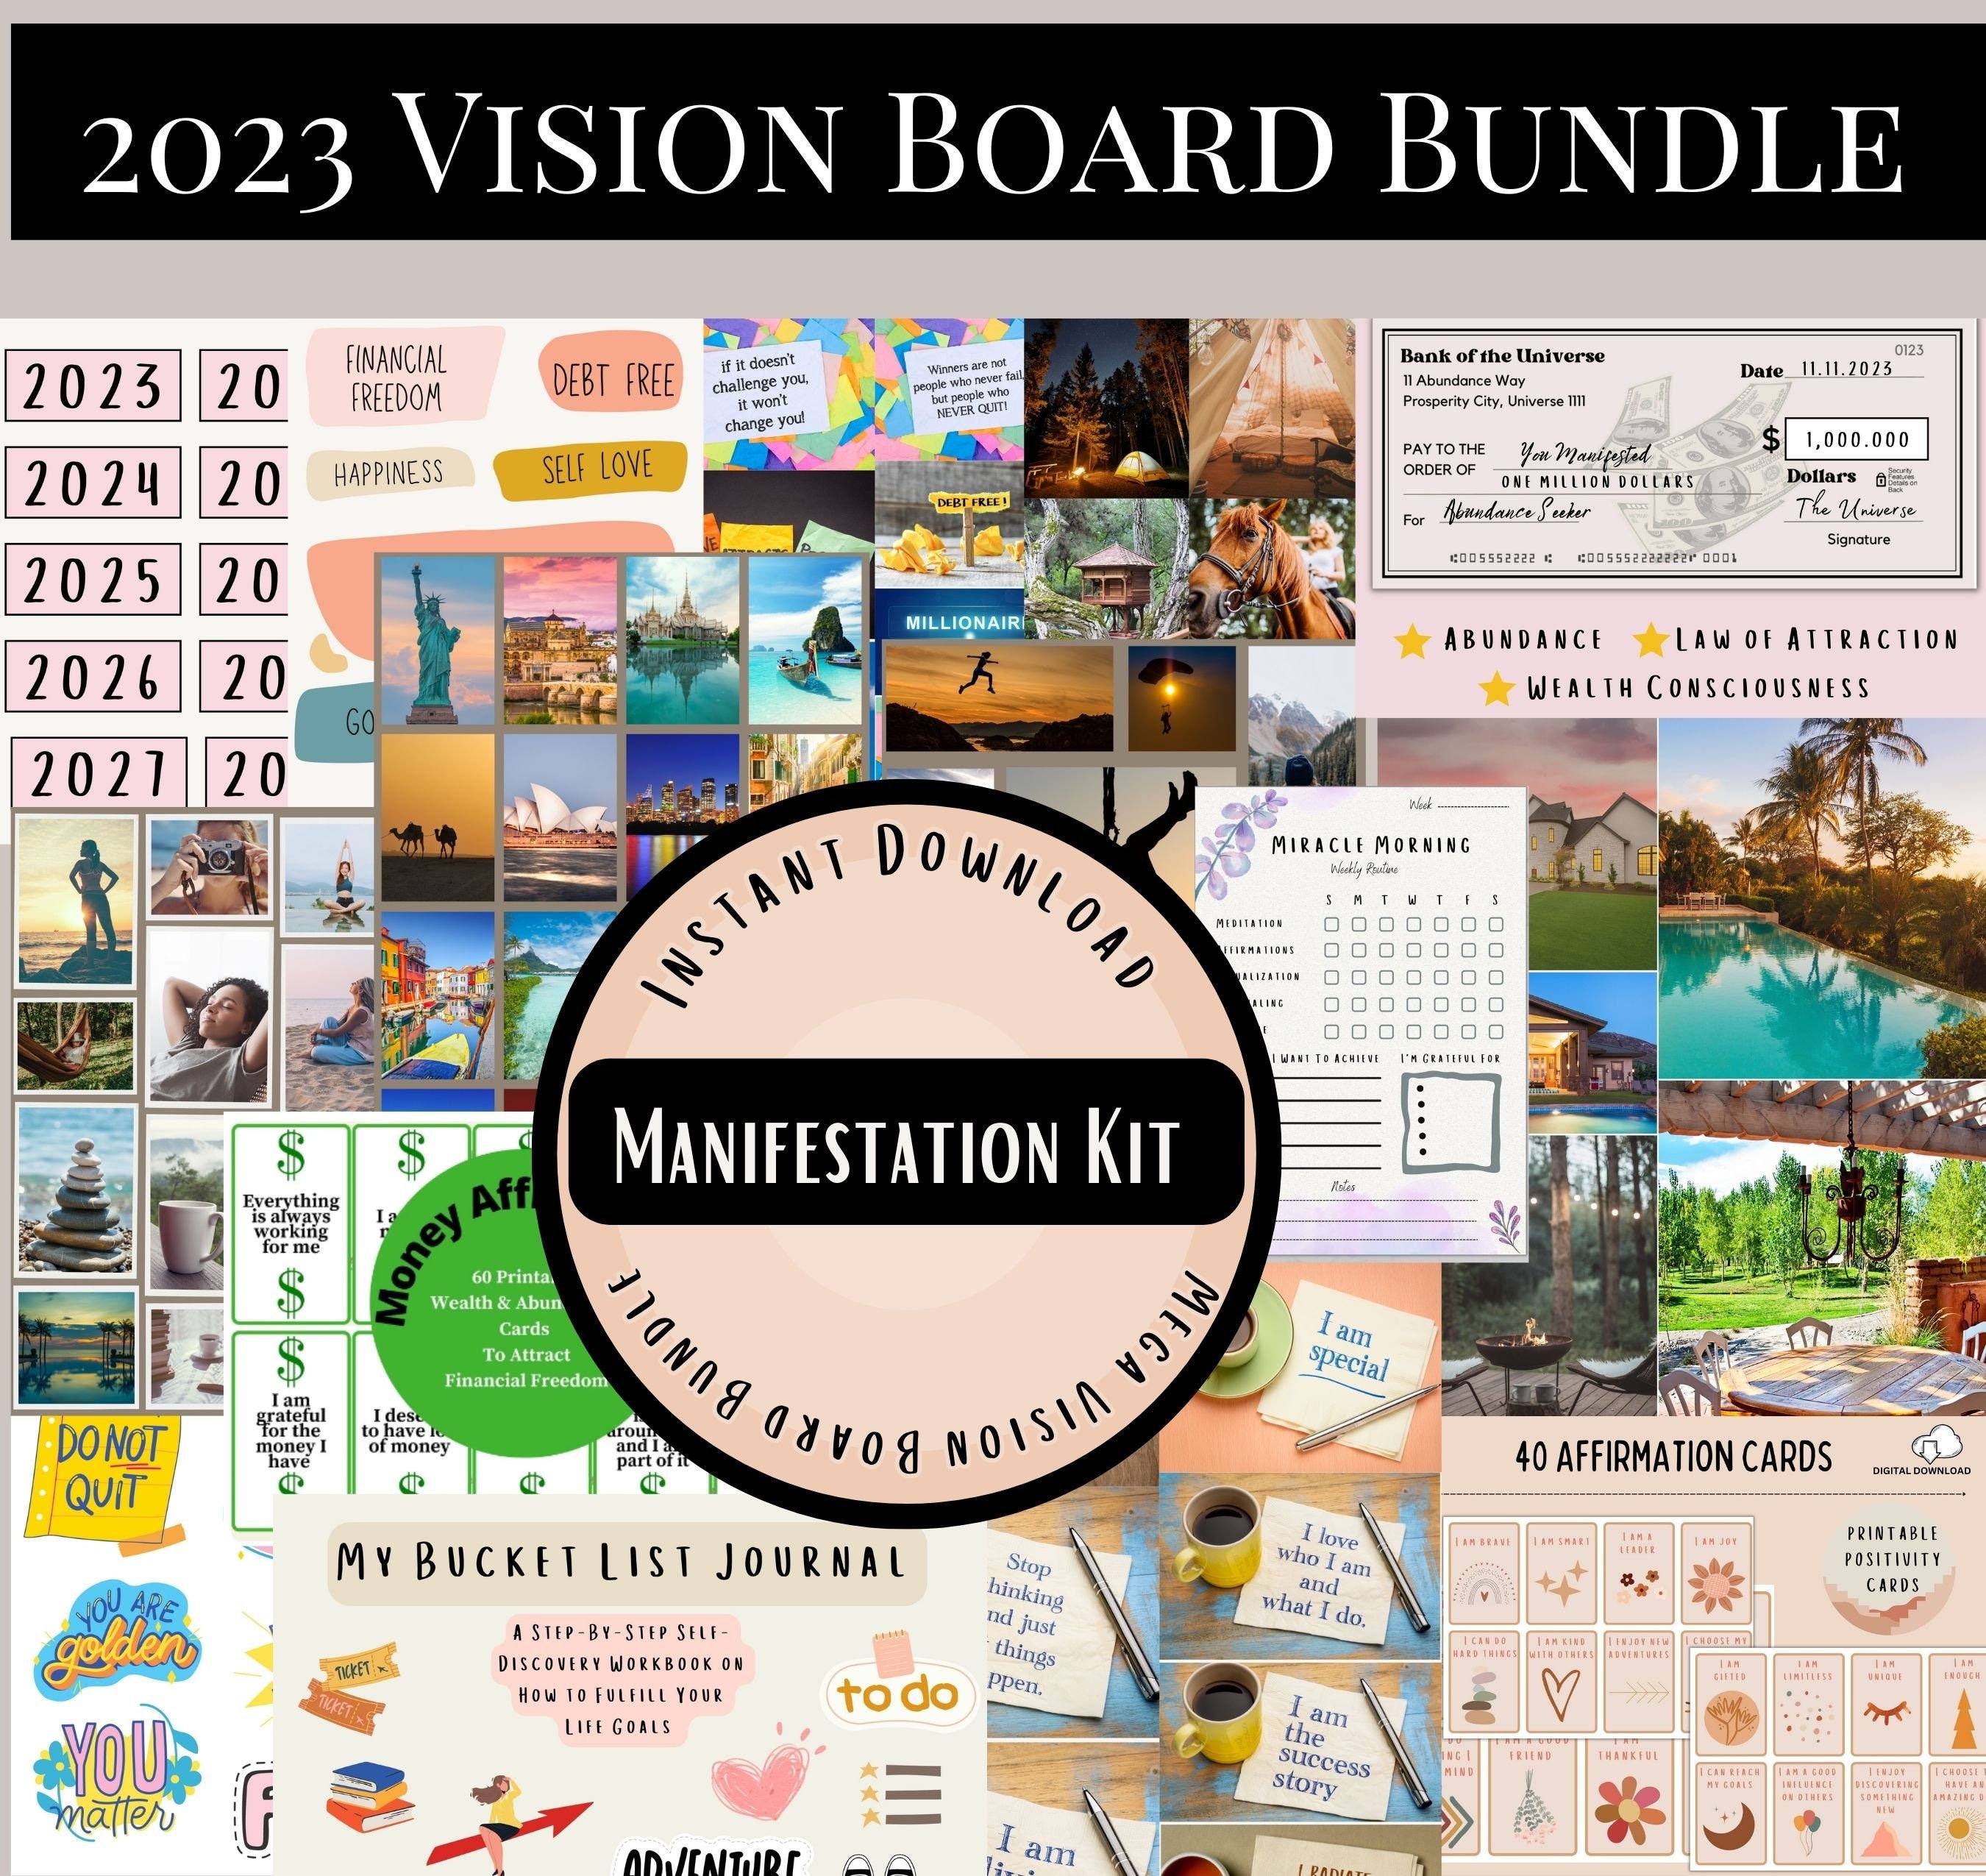 2023 Vision Board Words, Clip Art, Pictures and Cutouts: 600 Words, Quotes,  Images and Affirmations to Cut Out and Stick (Vision Board Supplies)